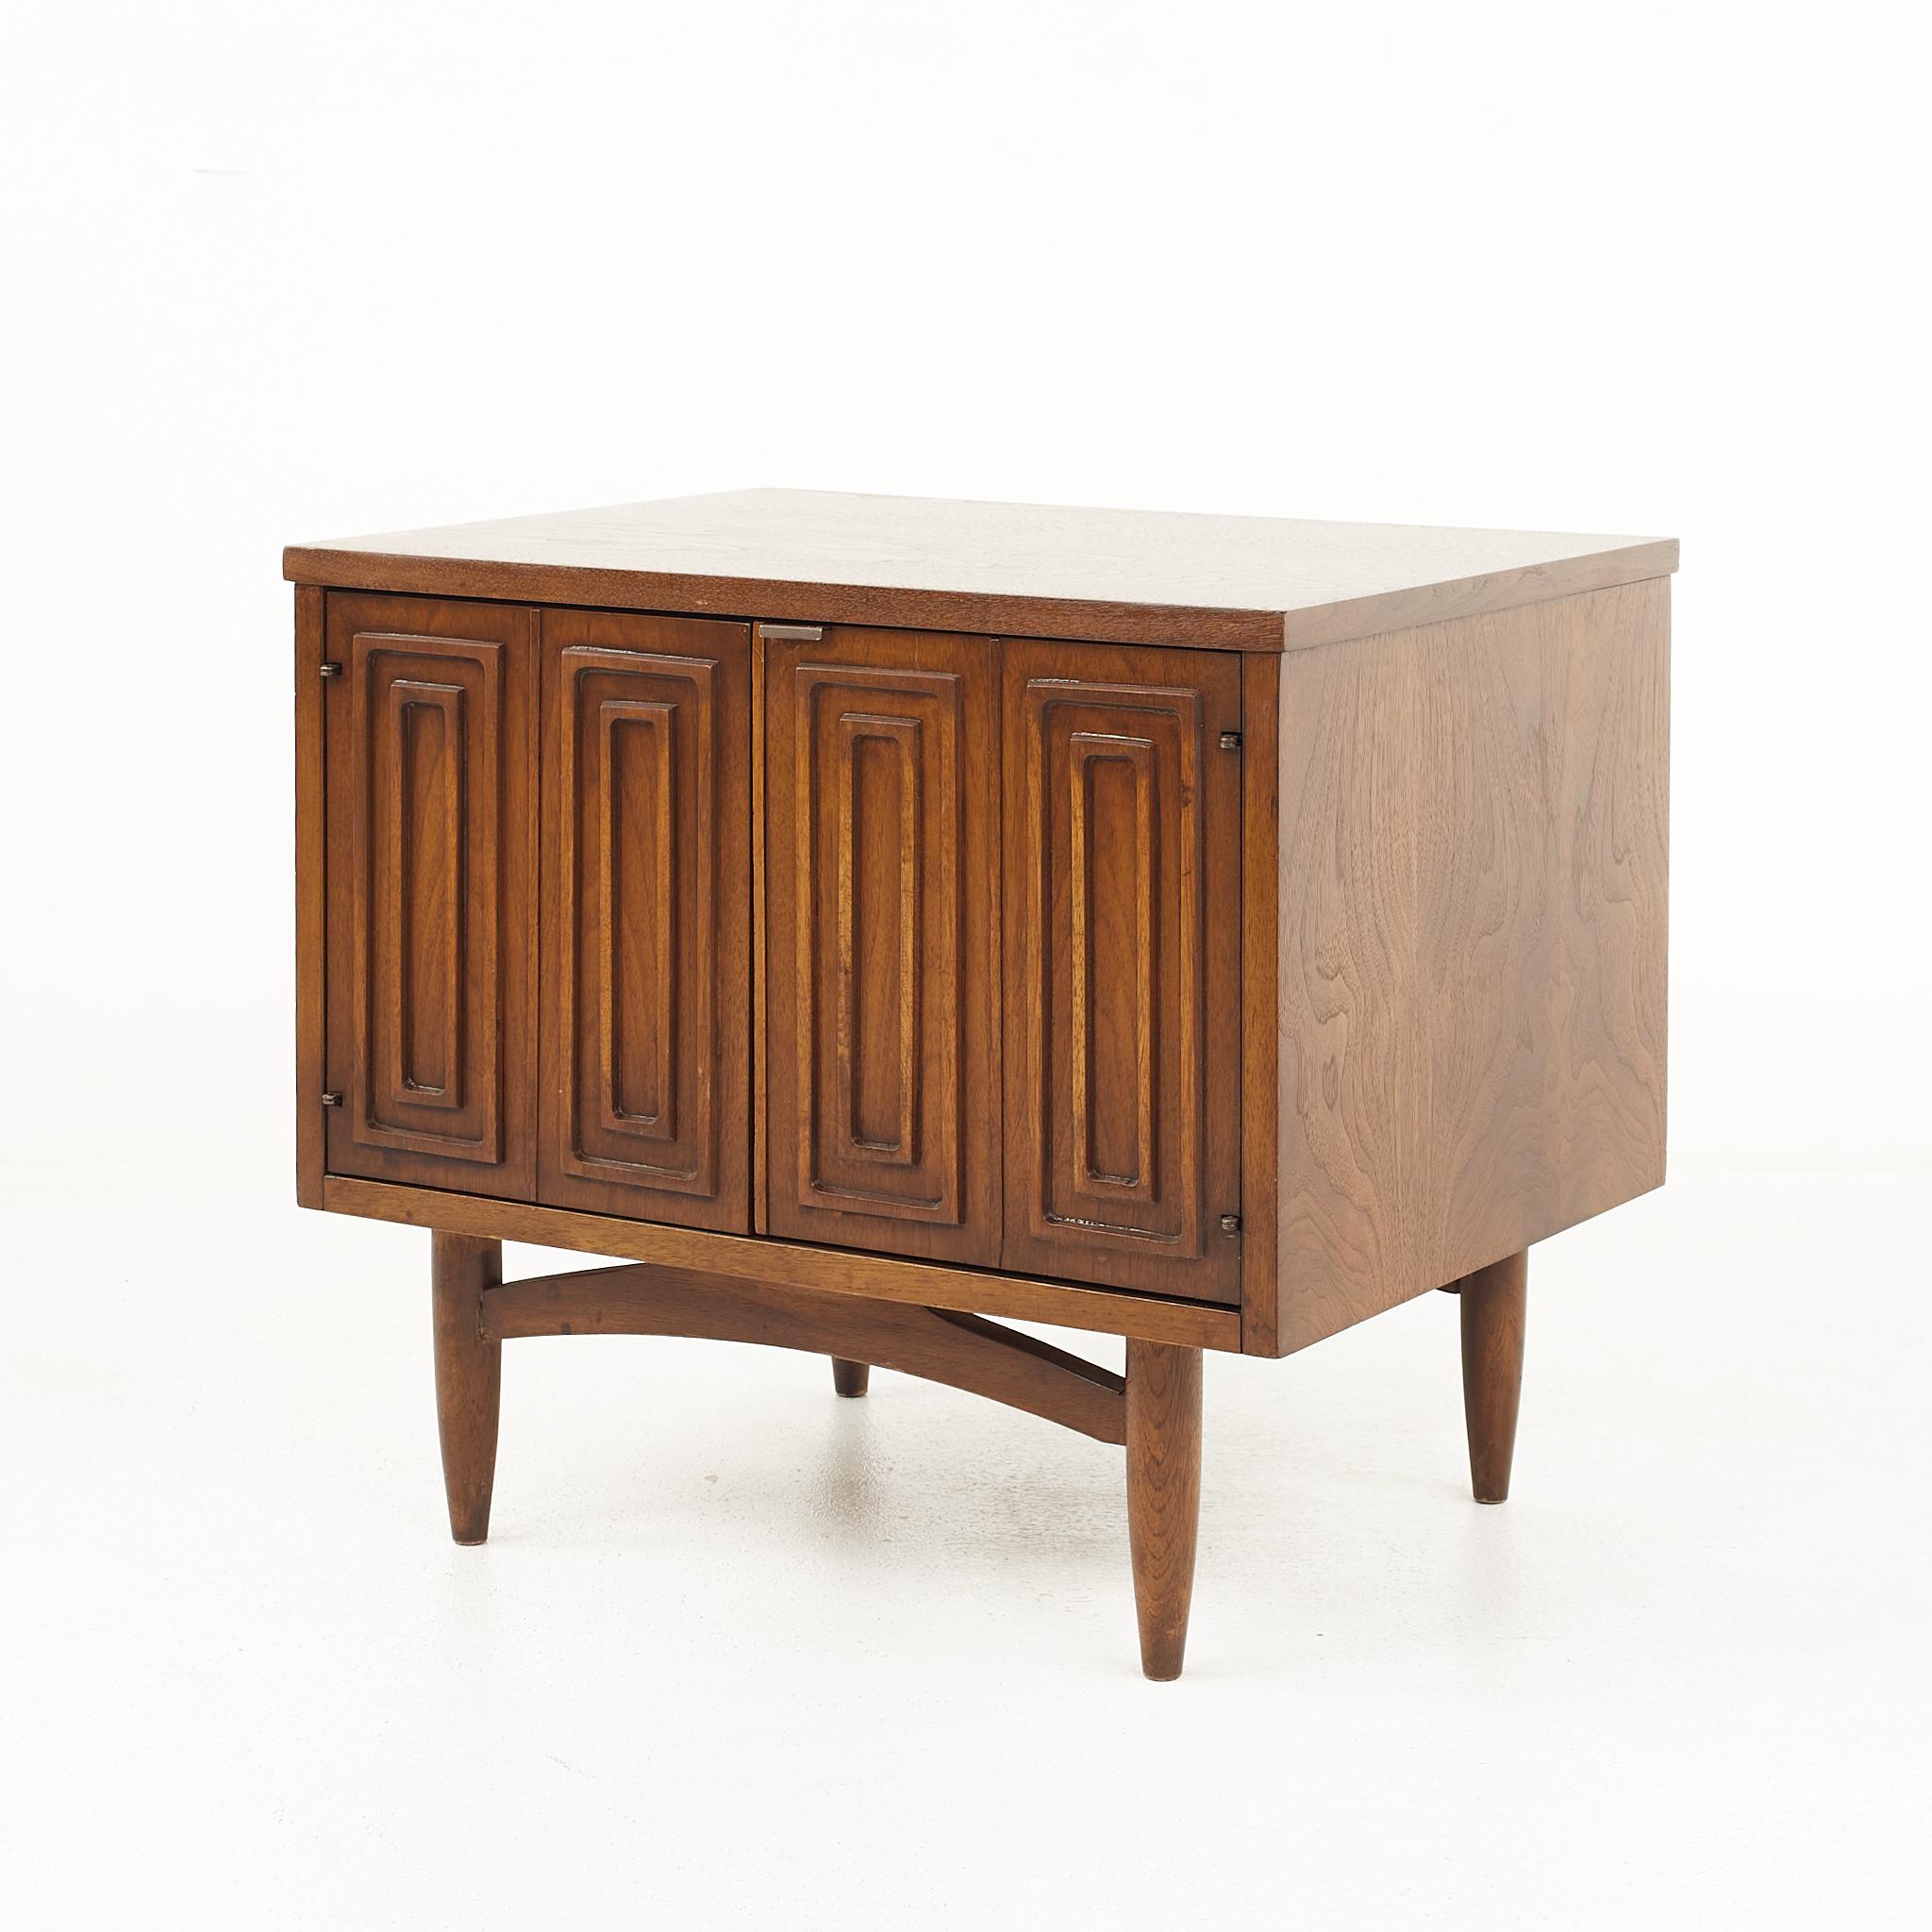 Broyhill Sculptra Brutalist Mid-Century Walnut Commode Nightstands, a Pair In Good Condition For Sale In Countryside, IL